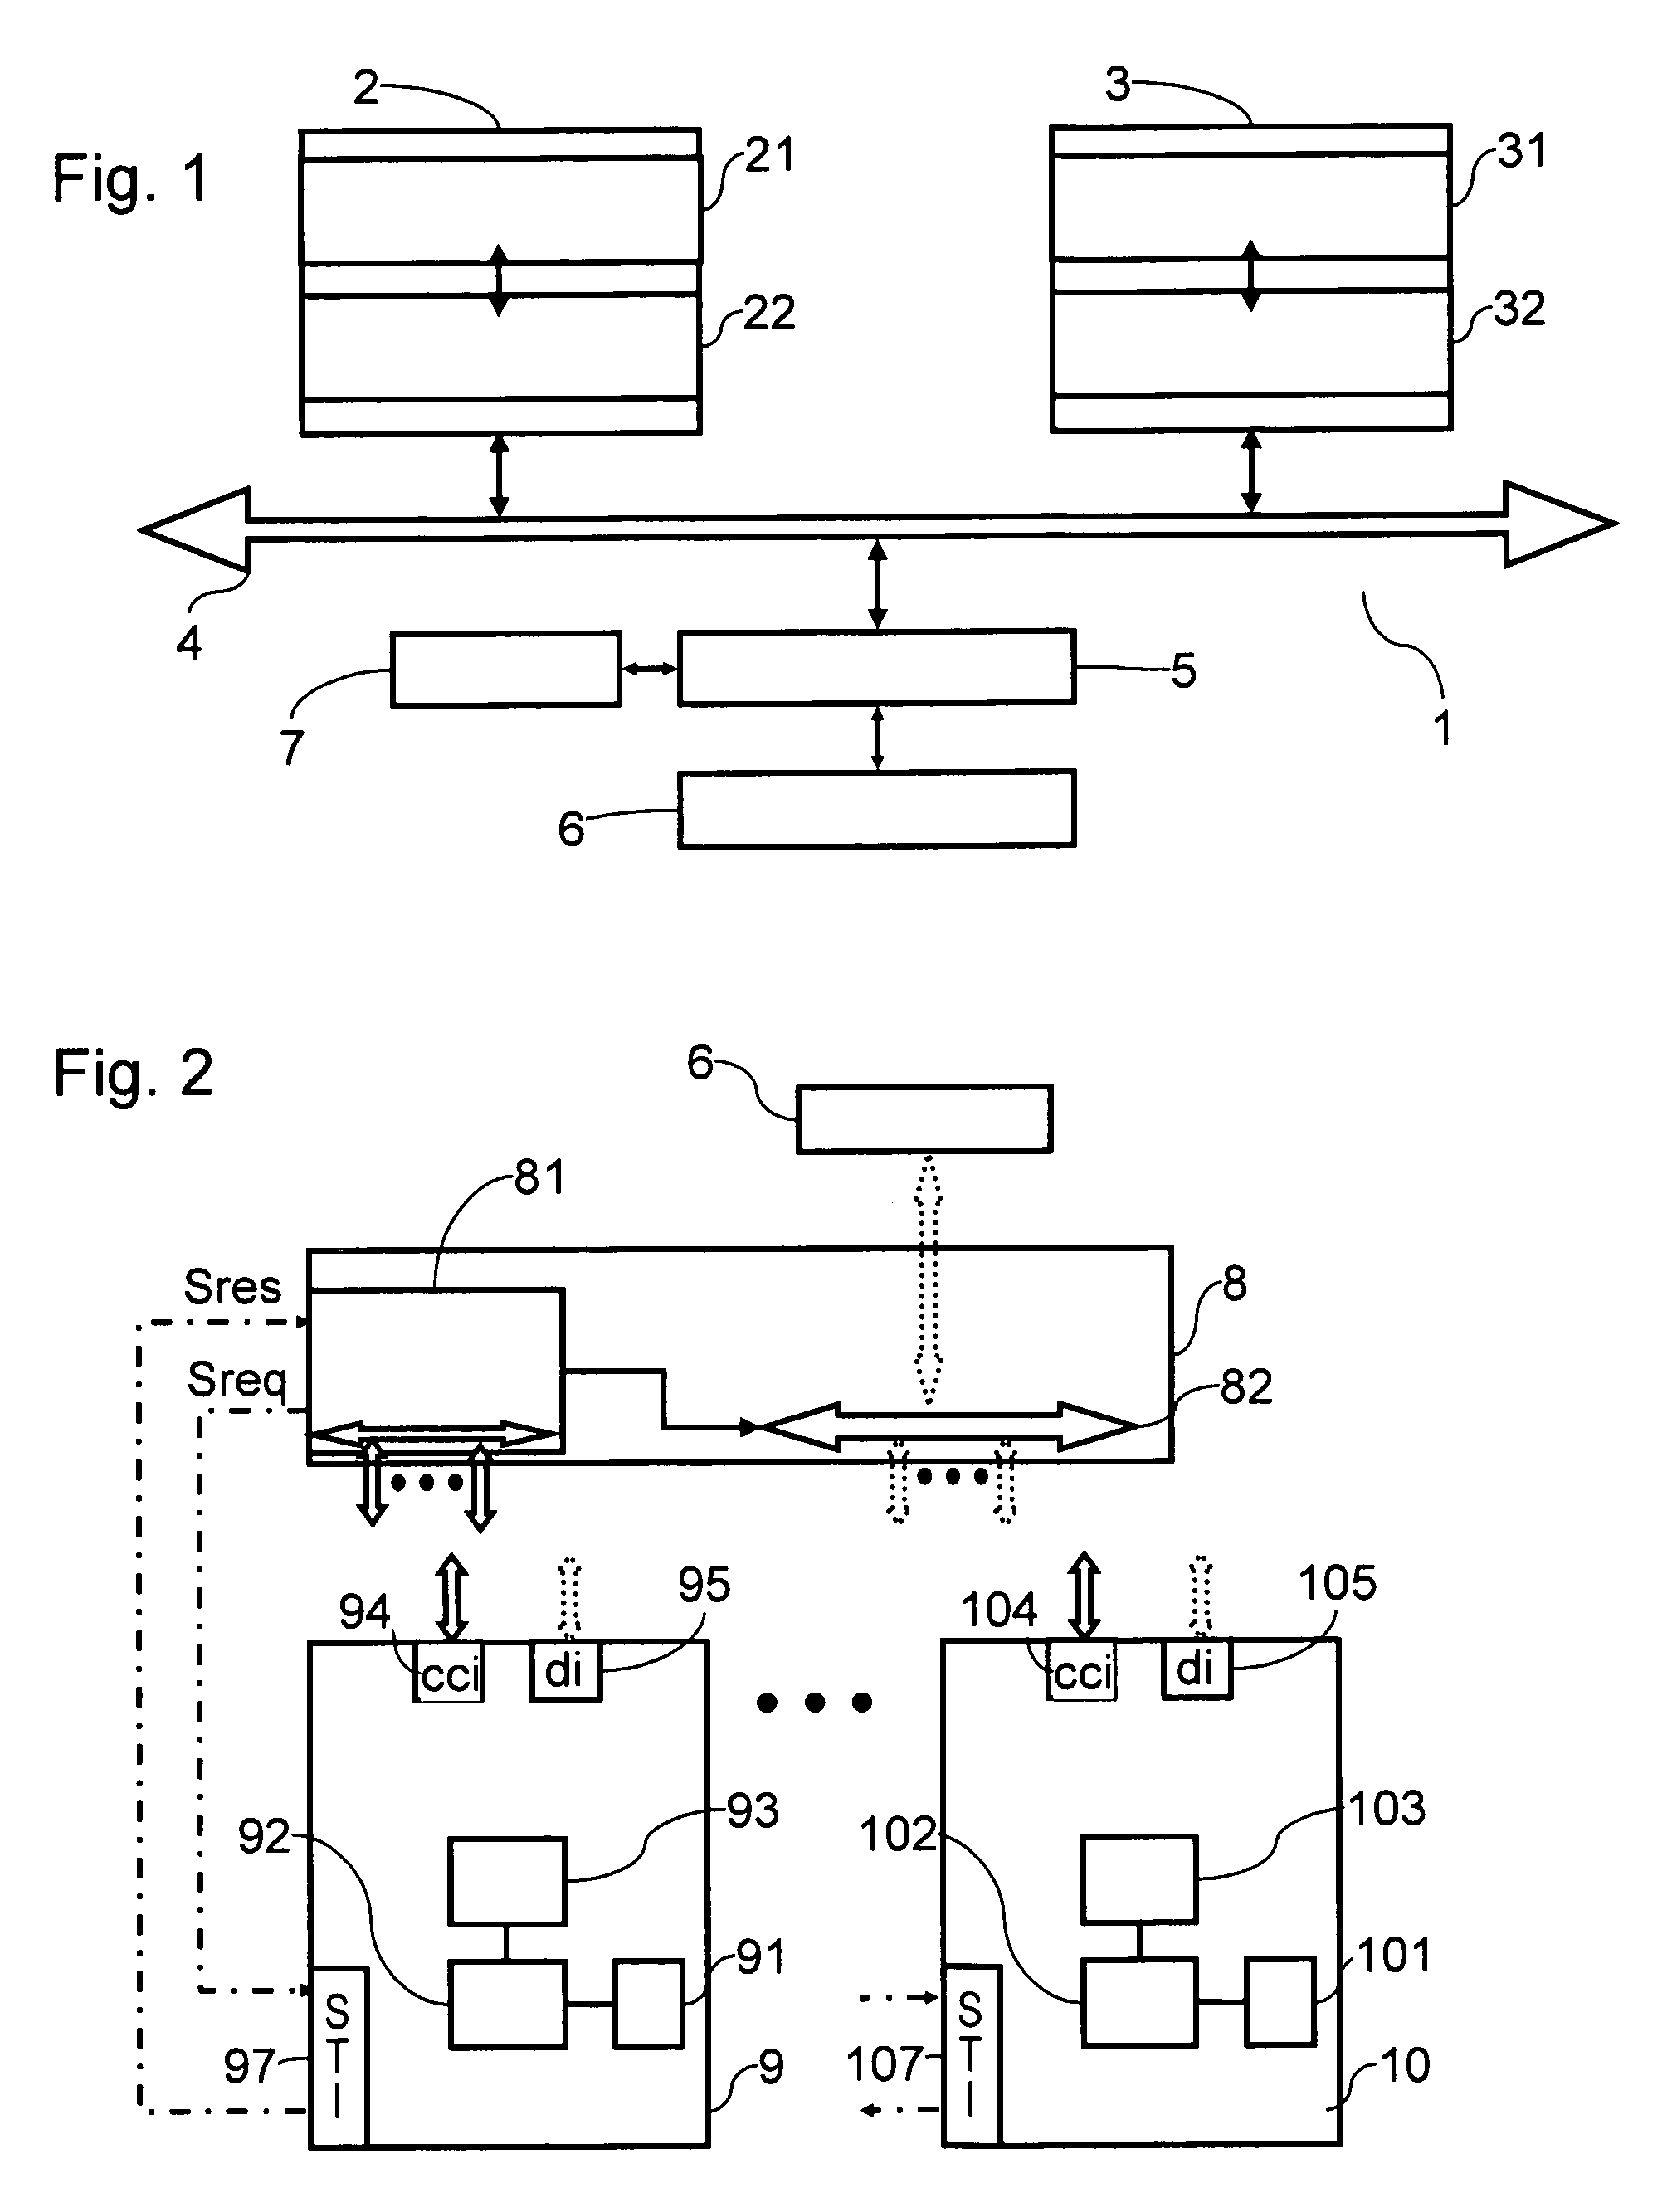 Cache coherency in a shared-memory multiprocessor system